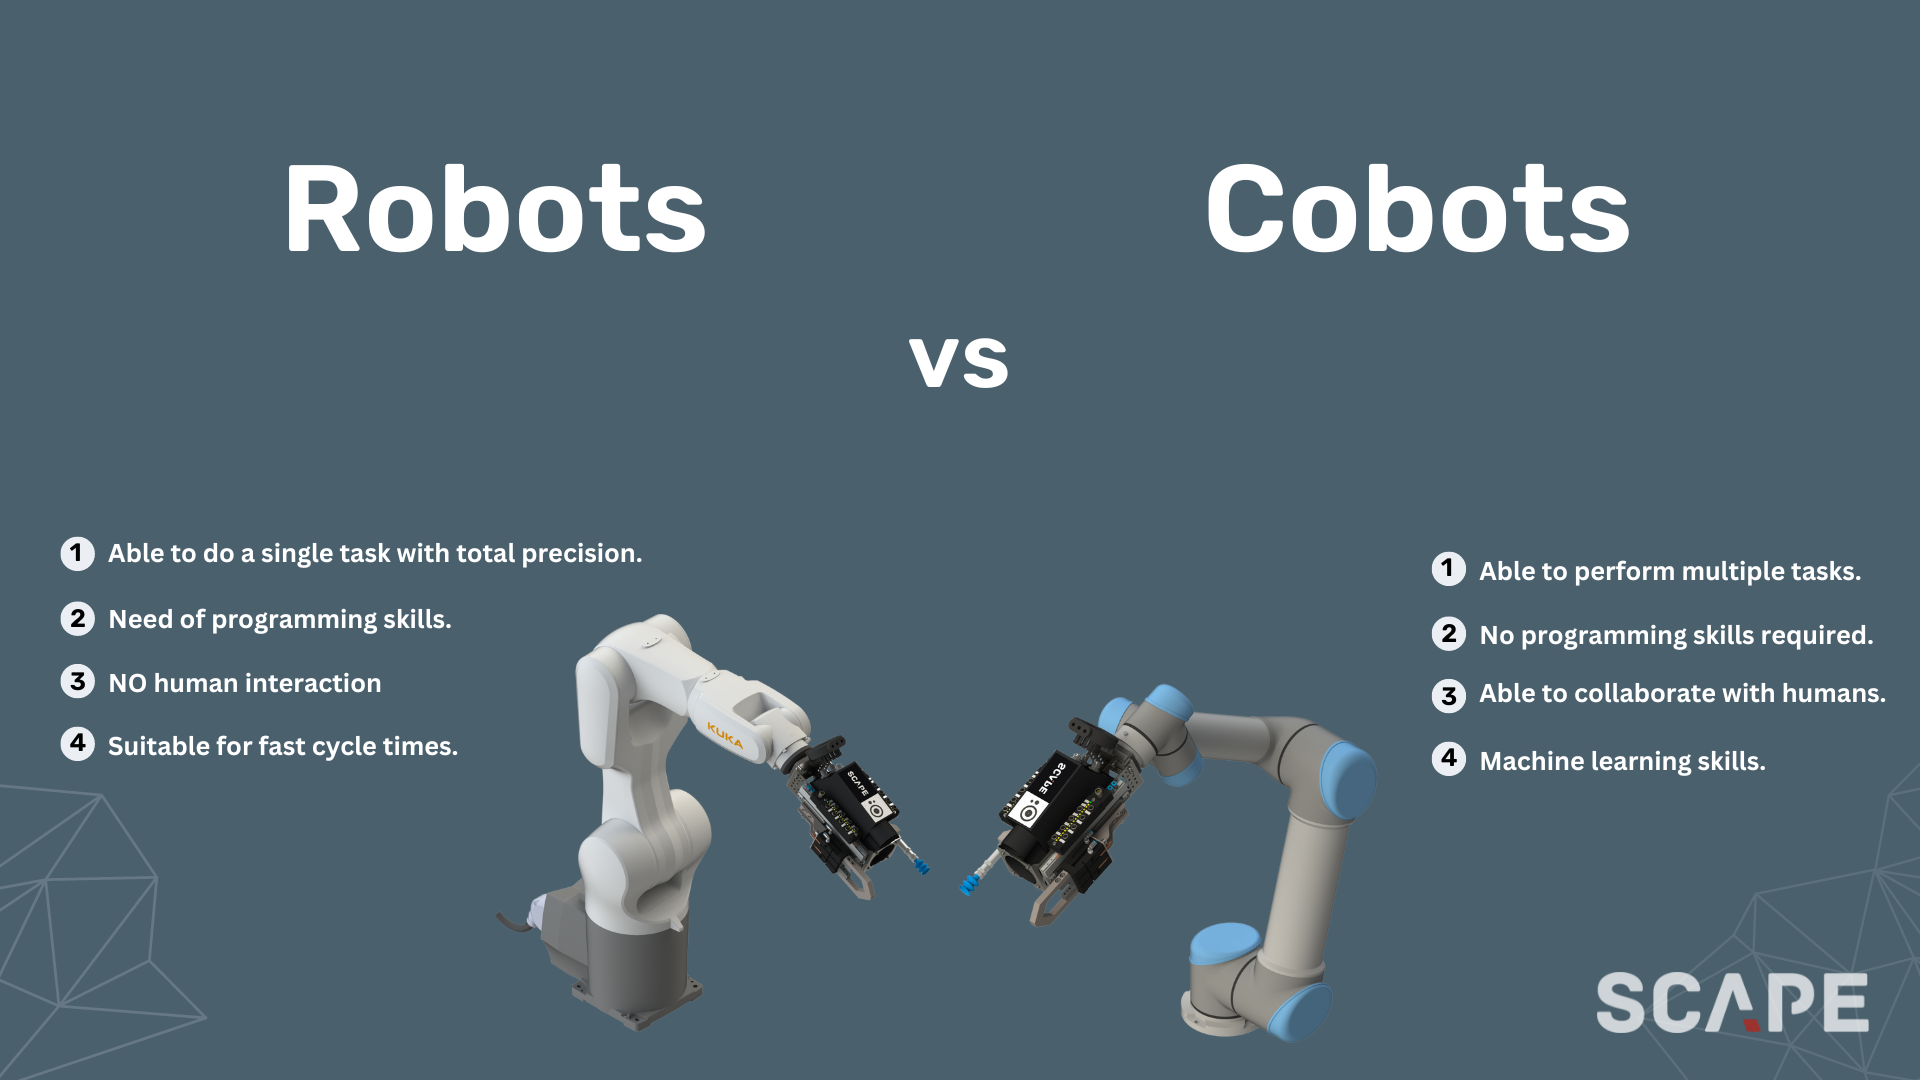 Main differences between industrial robots and cobots (collaborative robots)